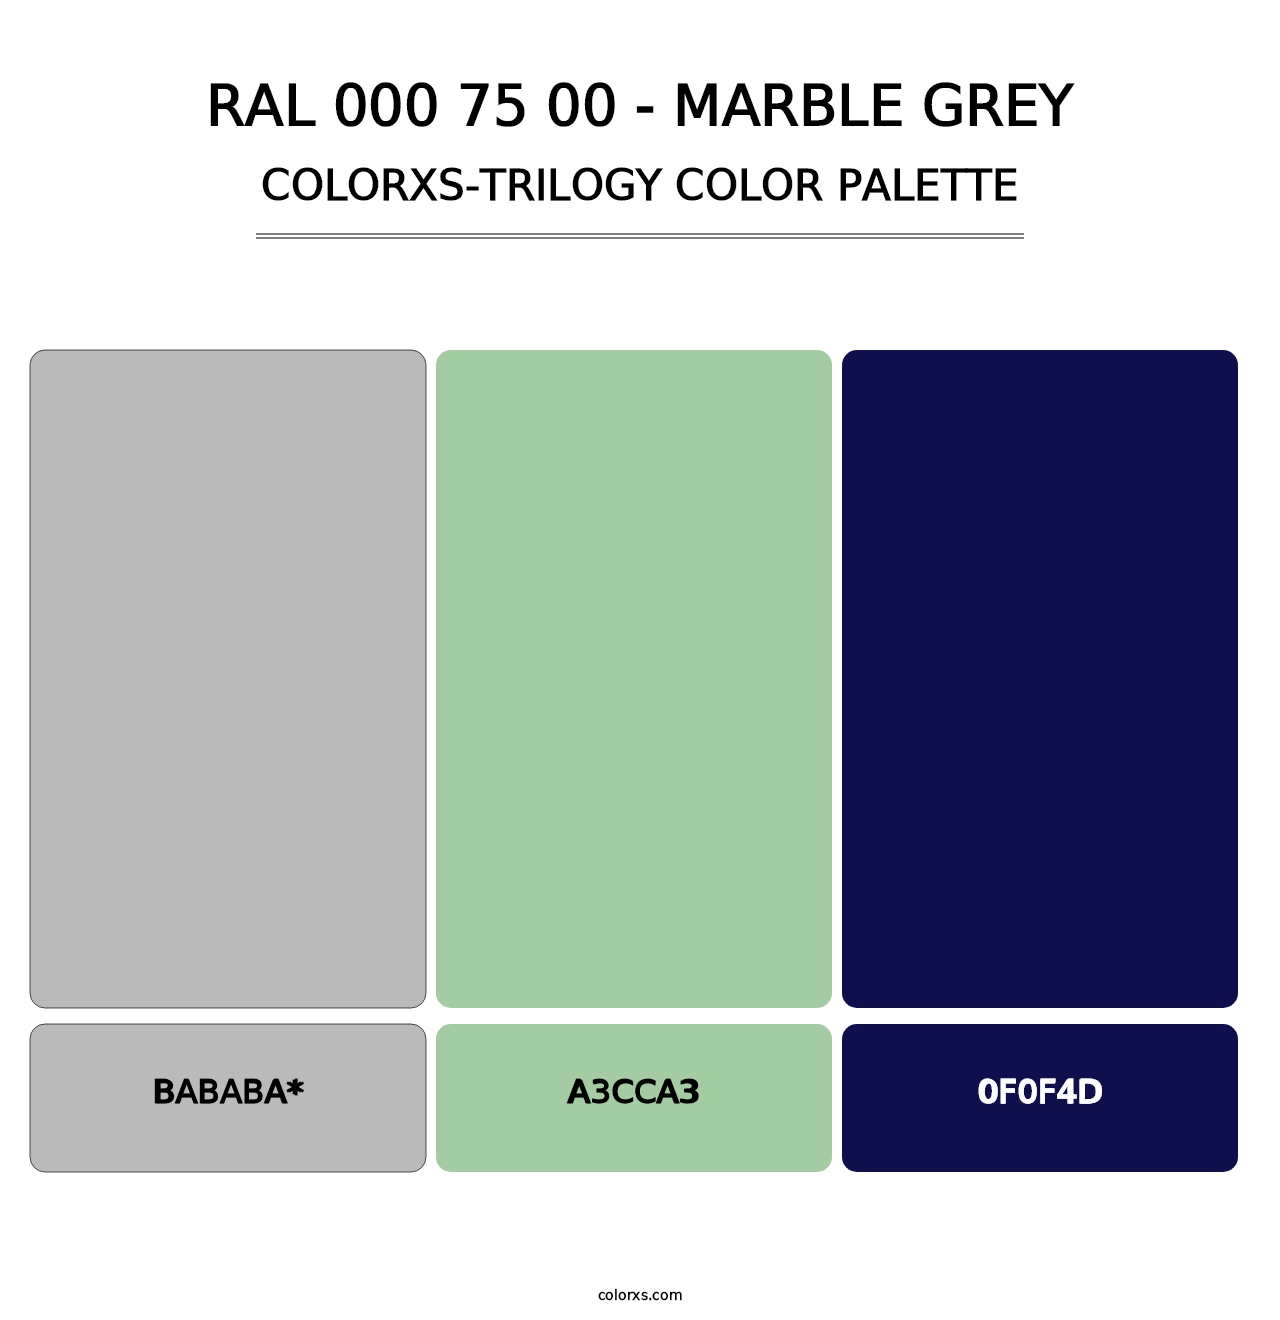 RAL 000 75 00 - Marble Grey - Colorxs Trilogy Palette